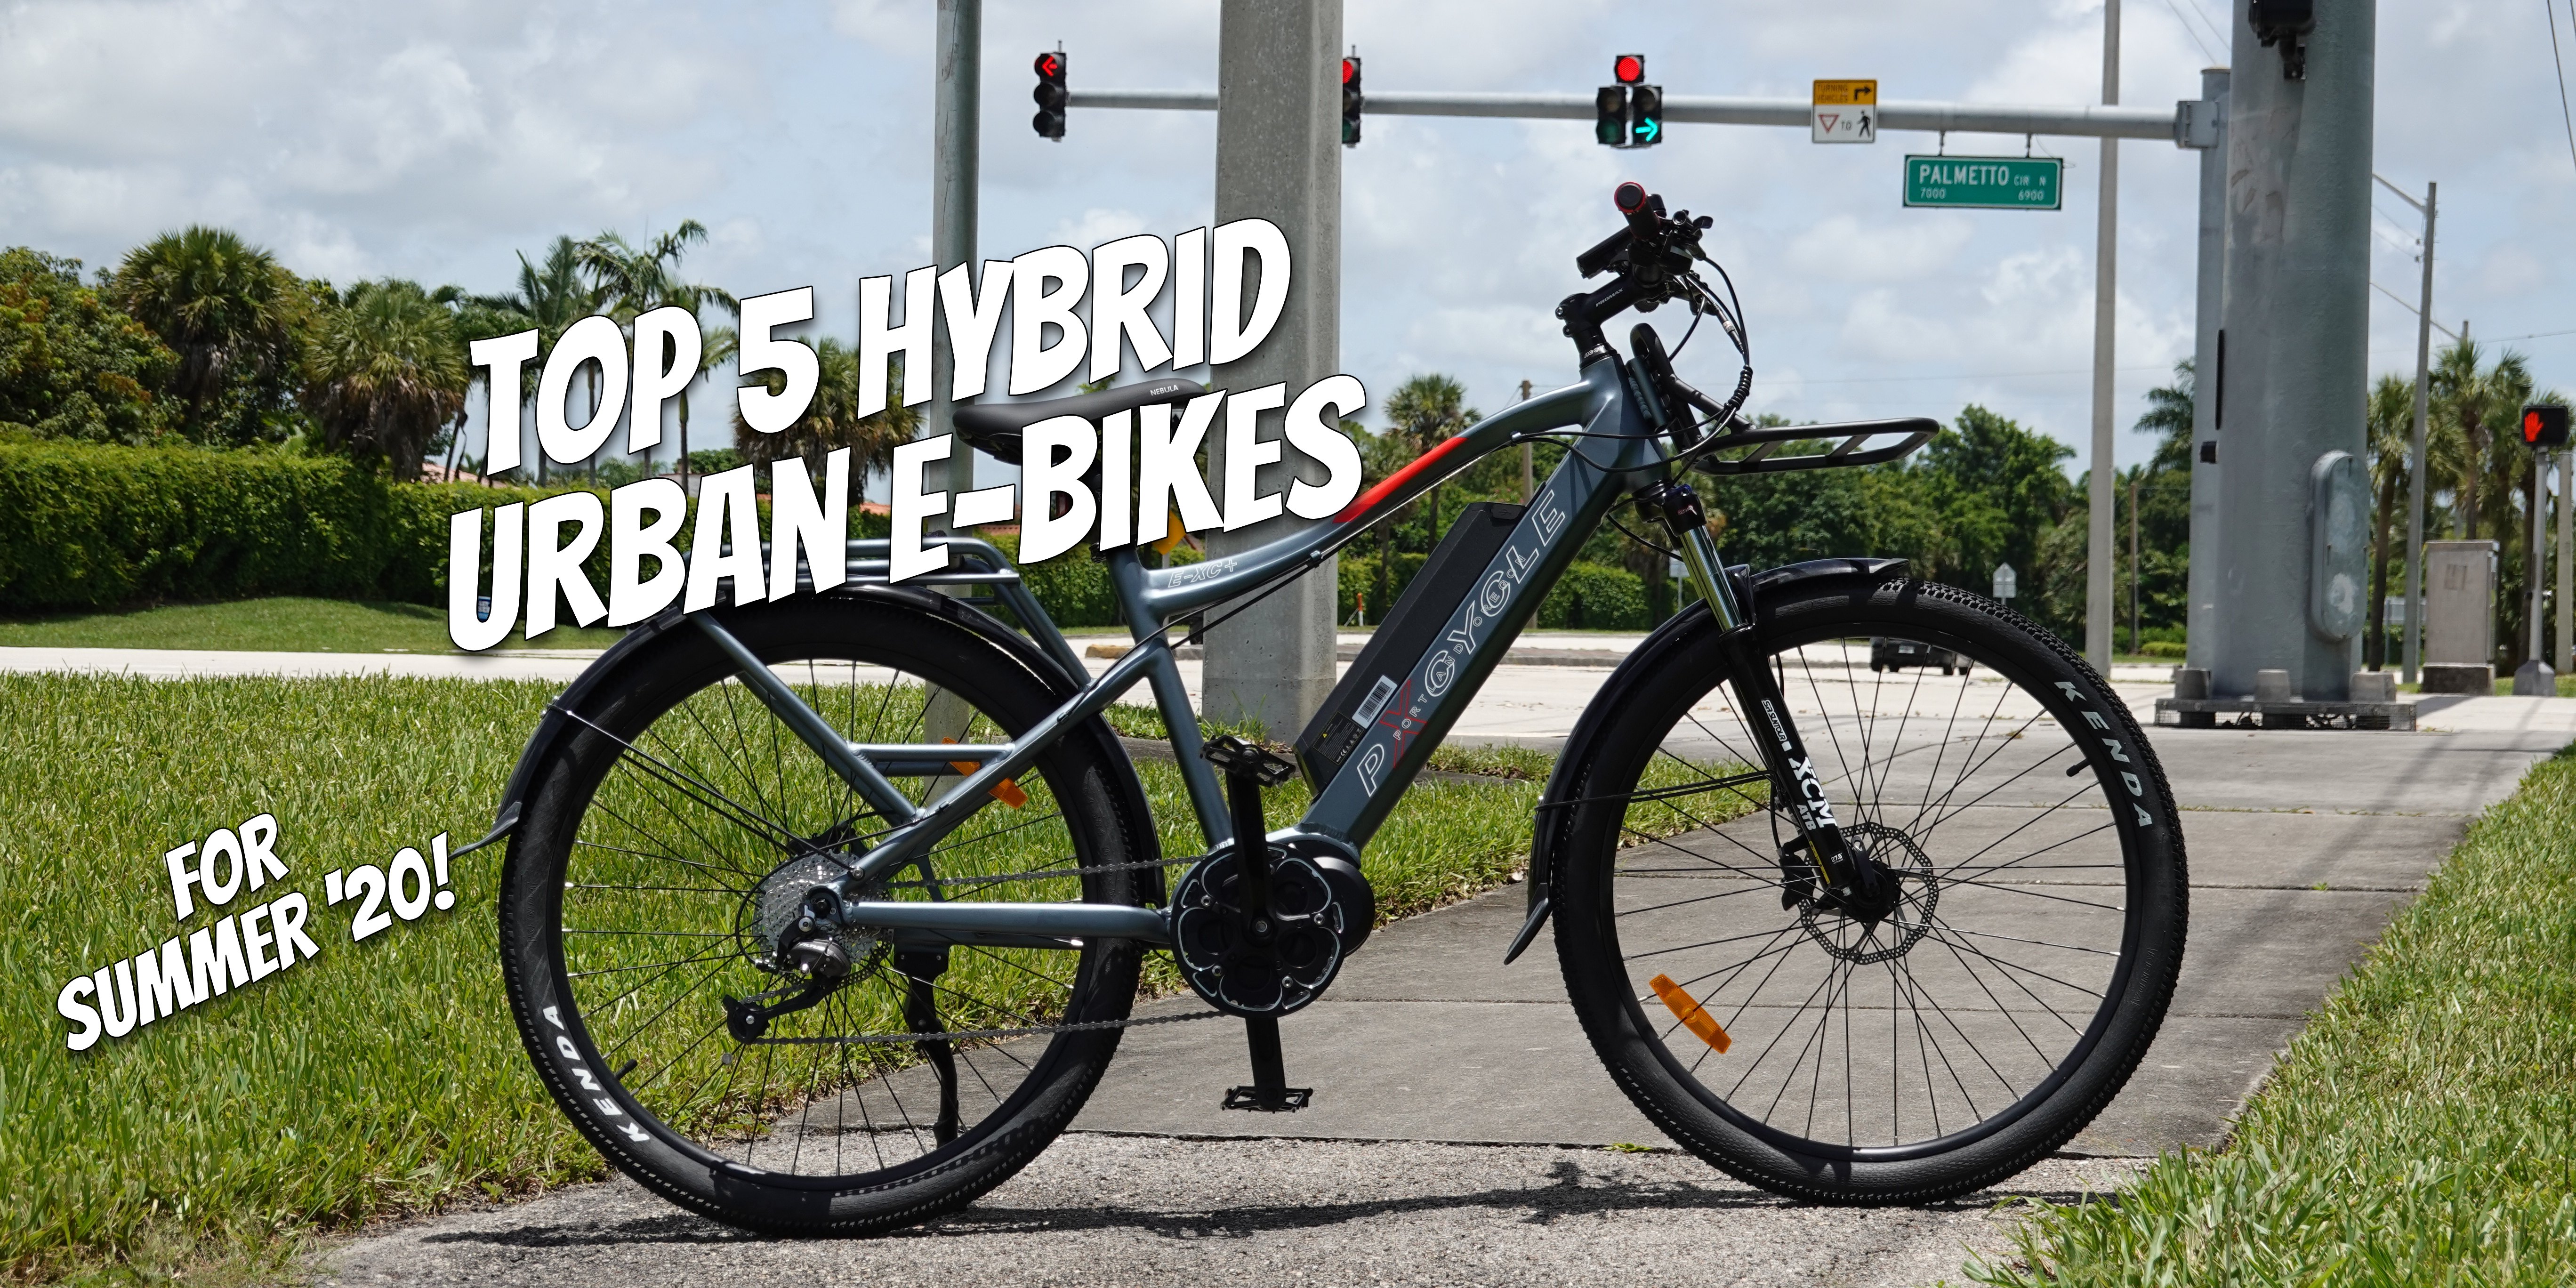 Are hybrid e-bikes suitable for hilly terrain?